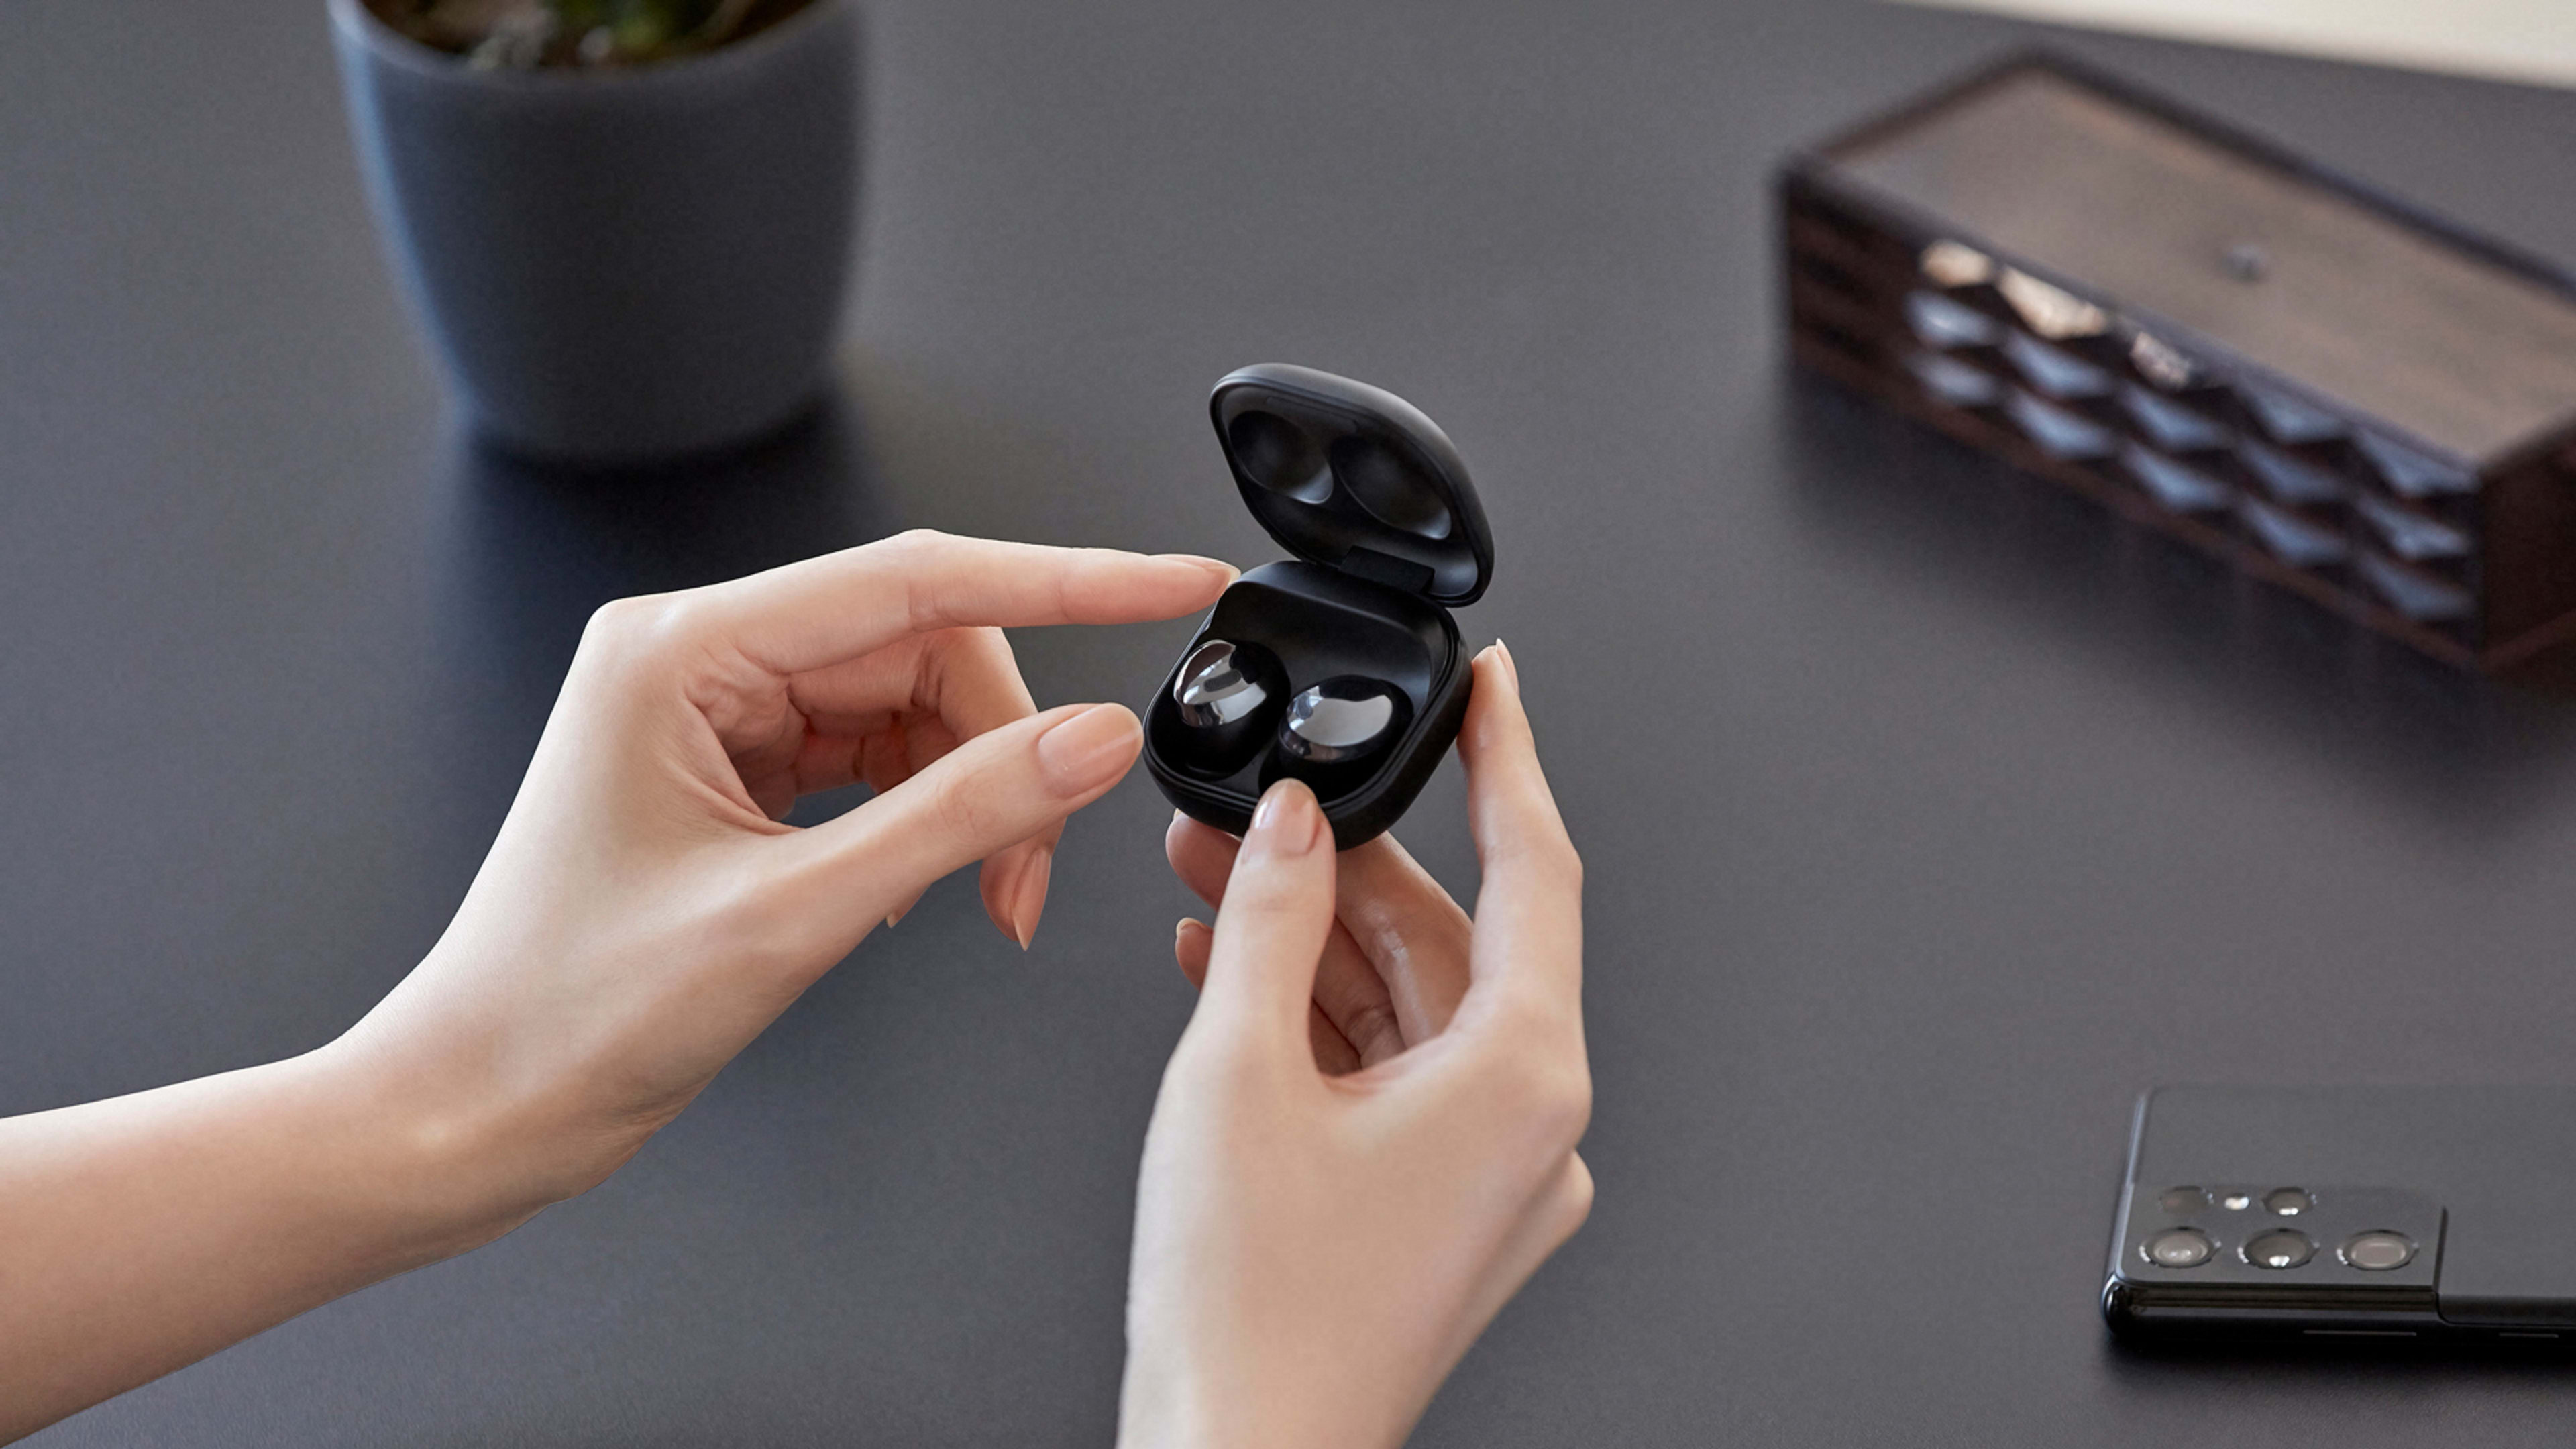 Samsung’s new earbuds have one feature that everyone should steal